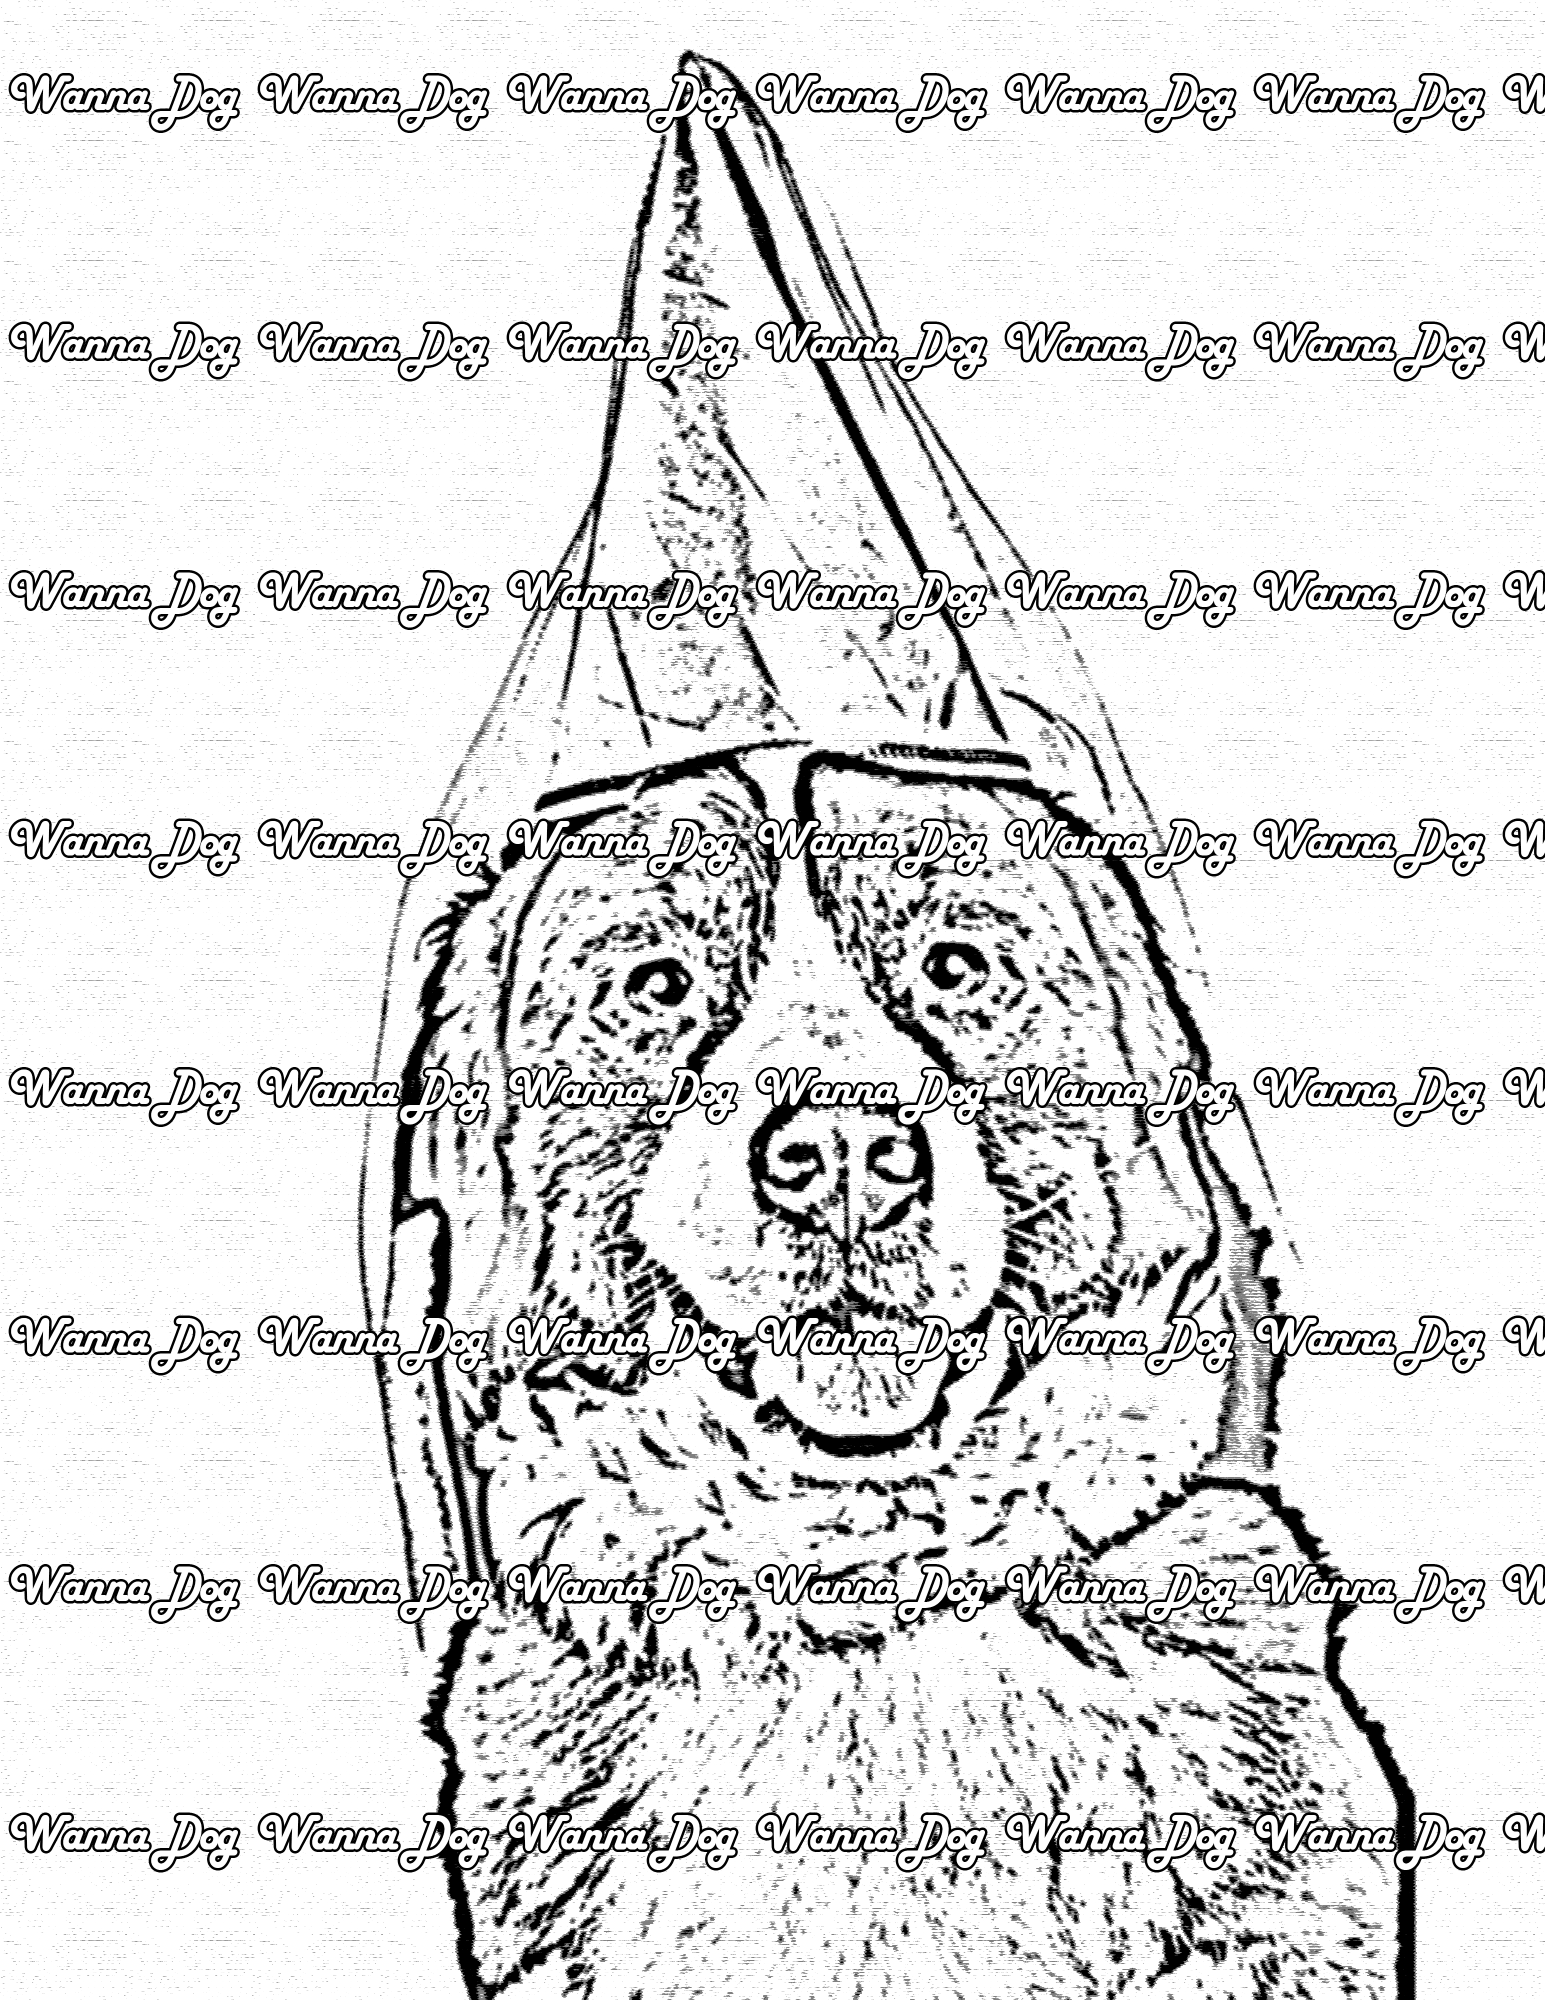 Bernese Mountain Dog Coloring Page of a Bernese Mountain Dog wearing a cone hat